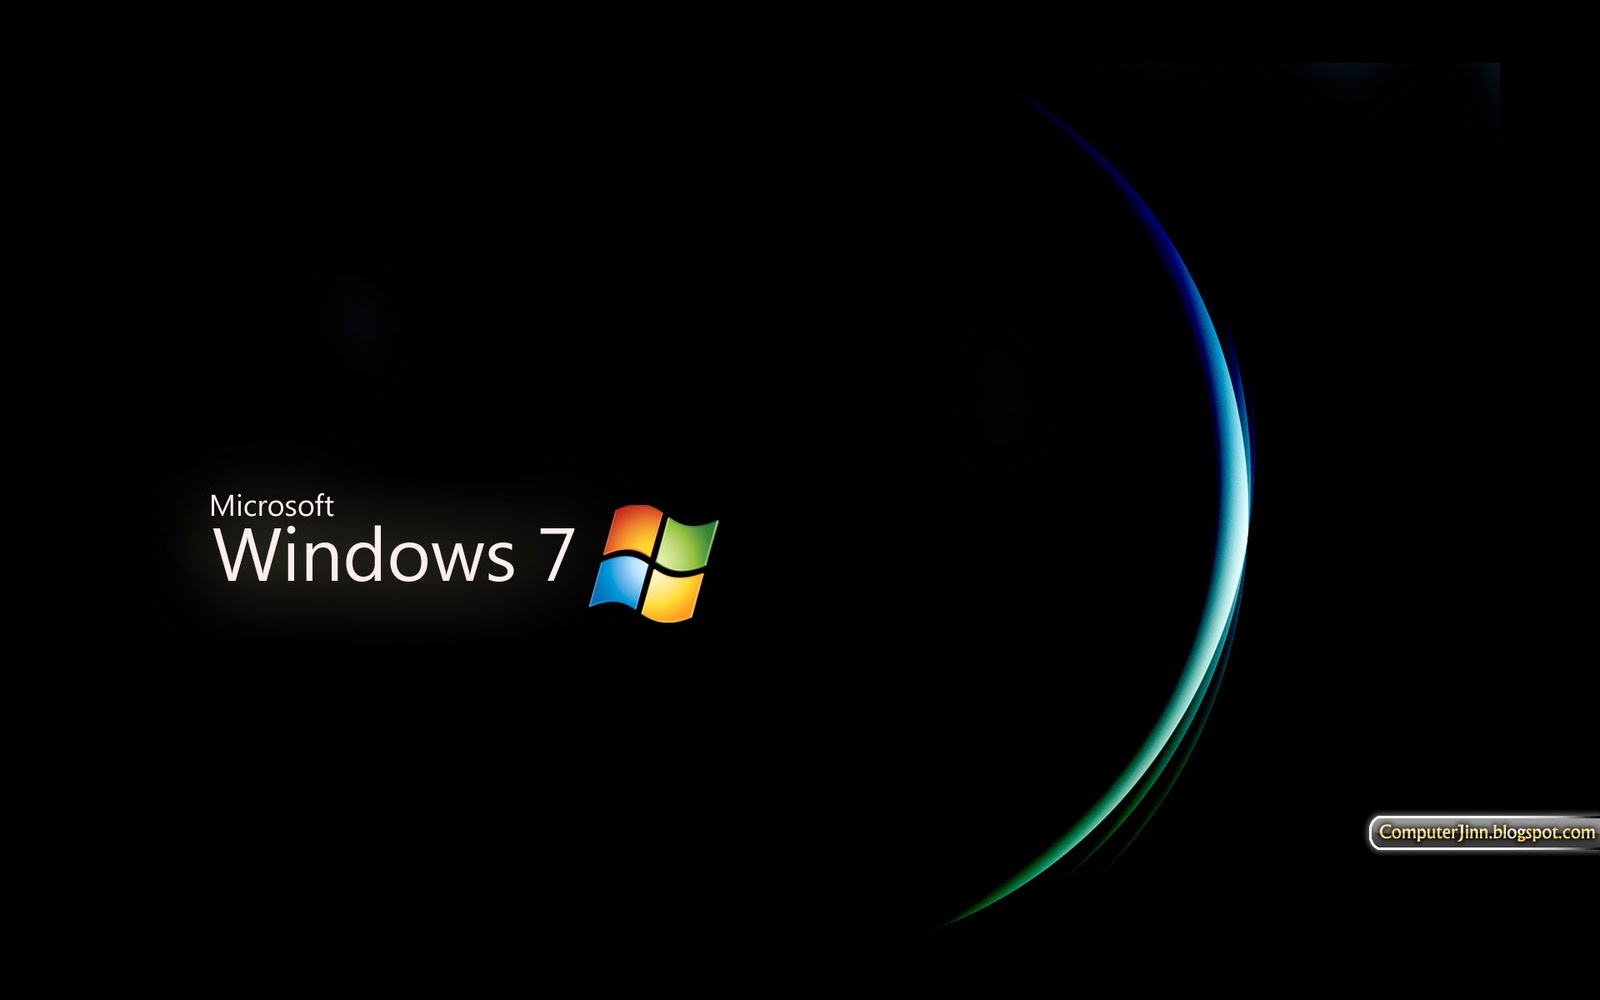 Windows 7 Black and Dark HD Wallpapers Wallpapers pictures images 1600x1000